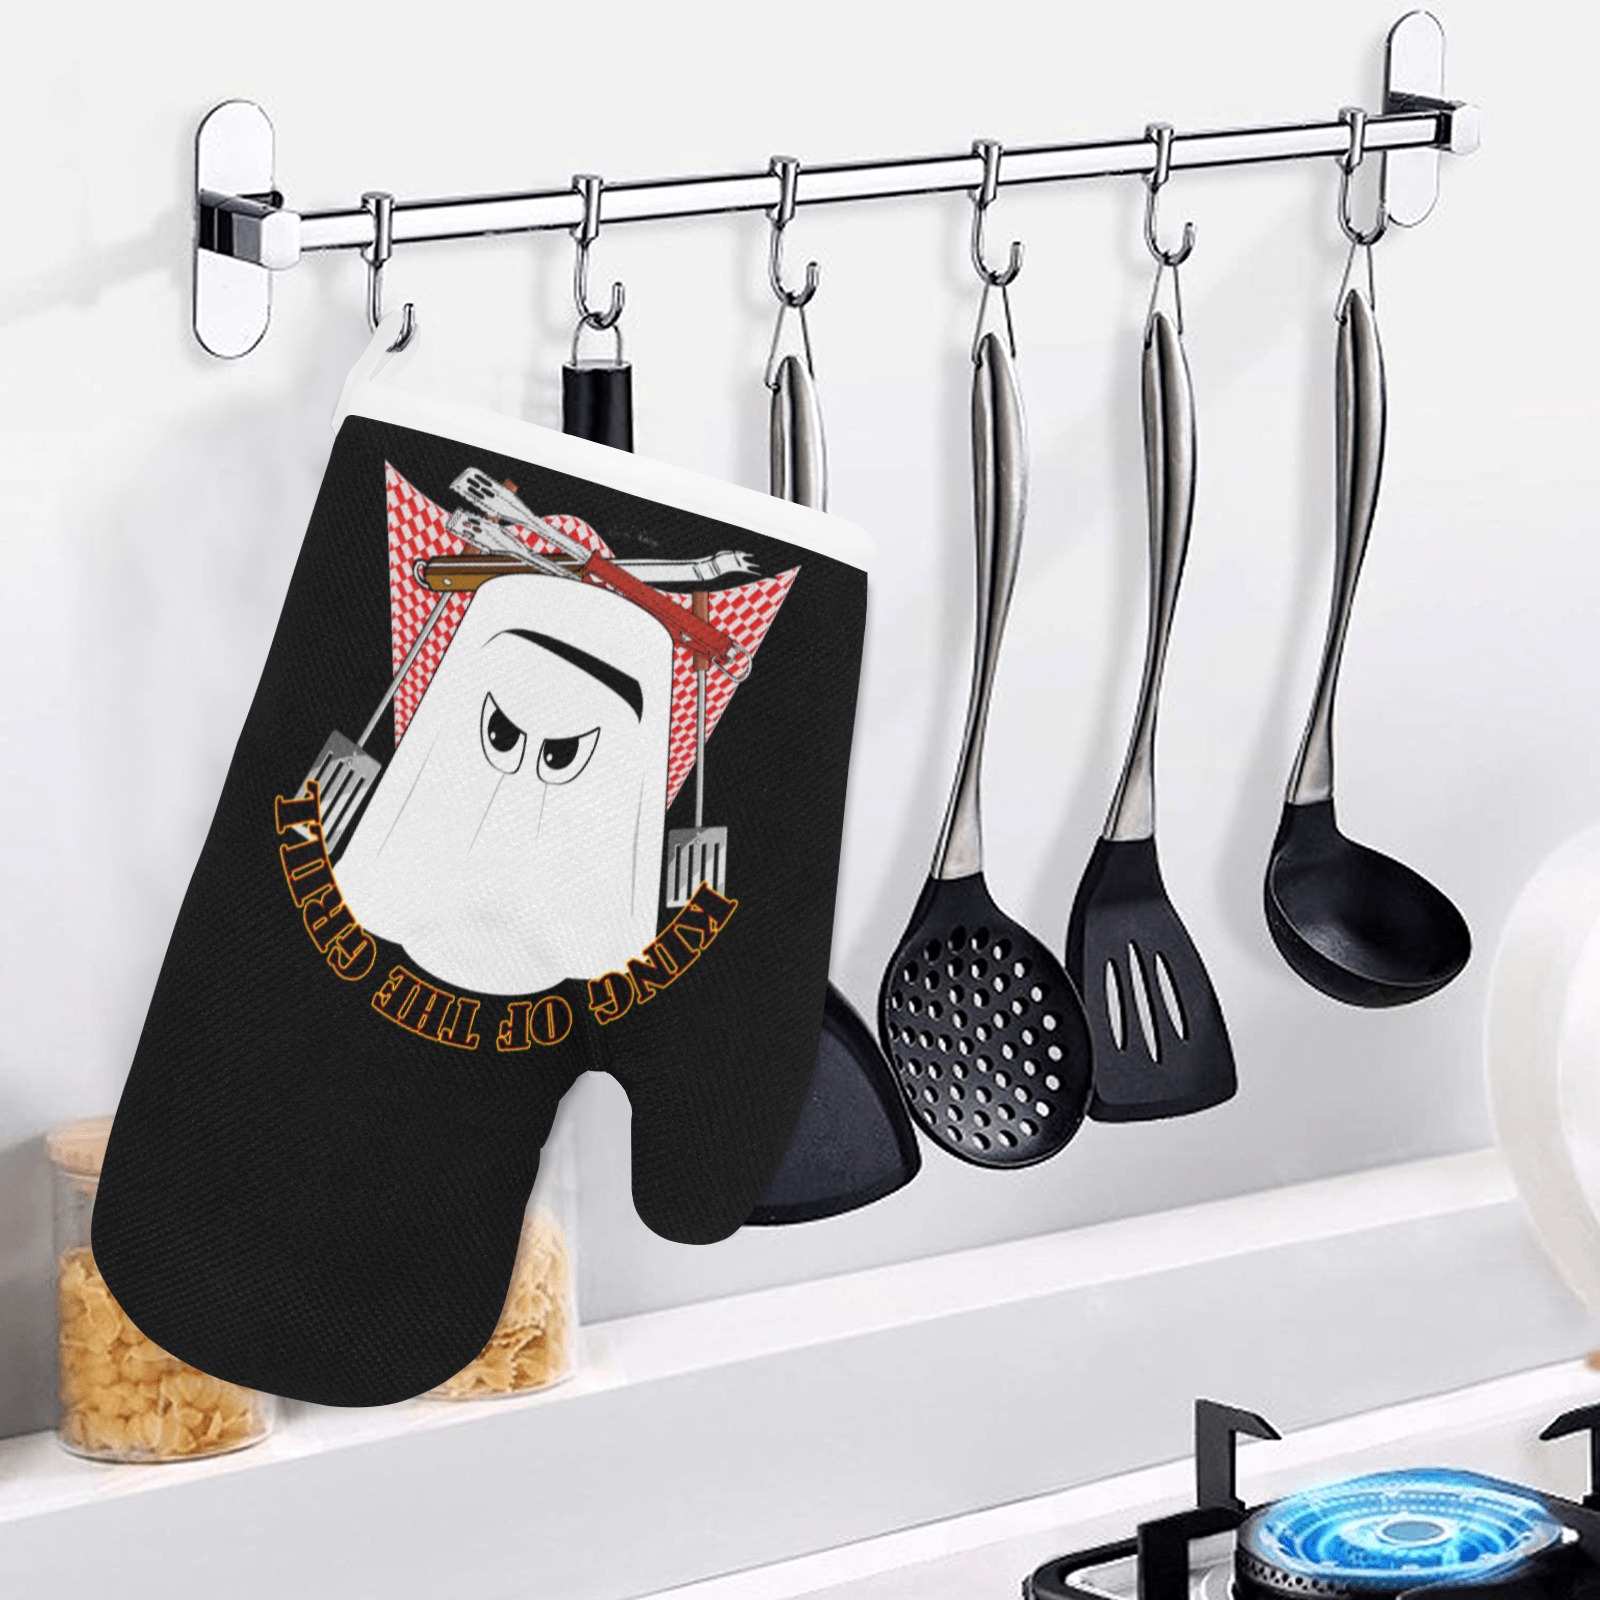 King of the Grill - Grill Master Black Linen Oven Mitt (One Piece)